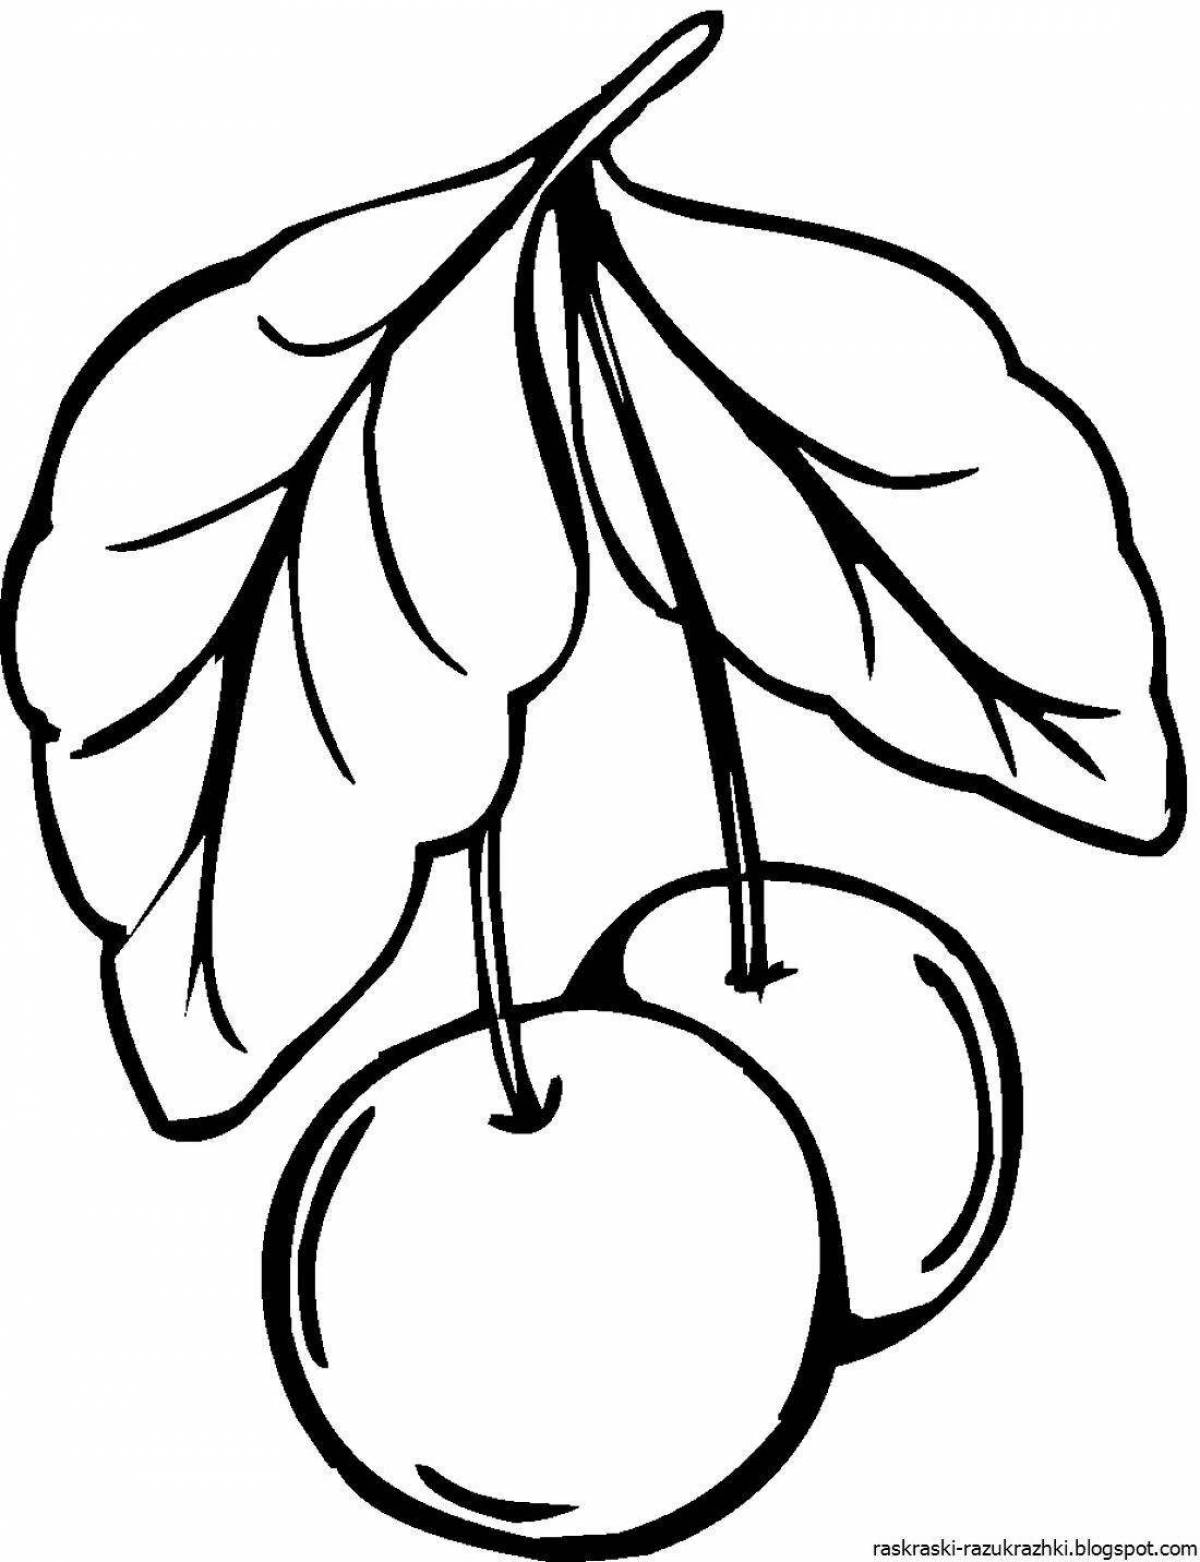 Adorable berries and fruits coloring pages for kids